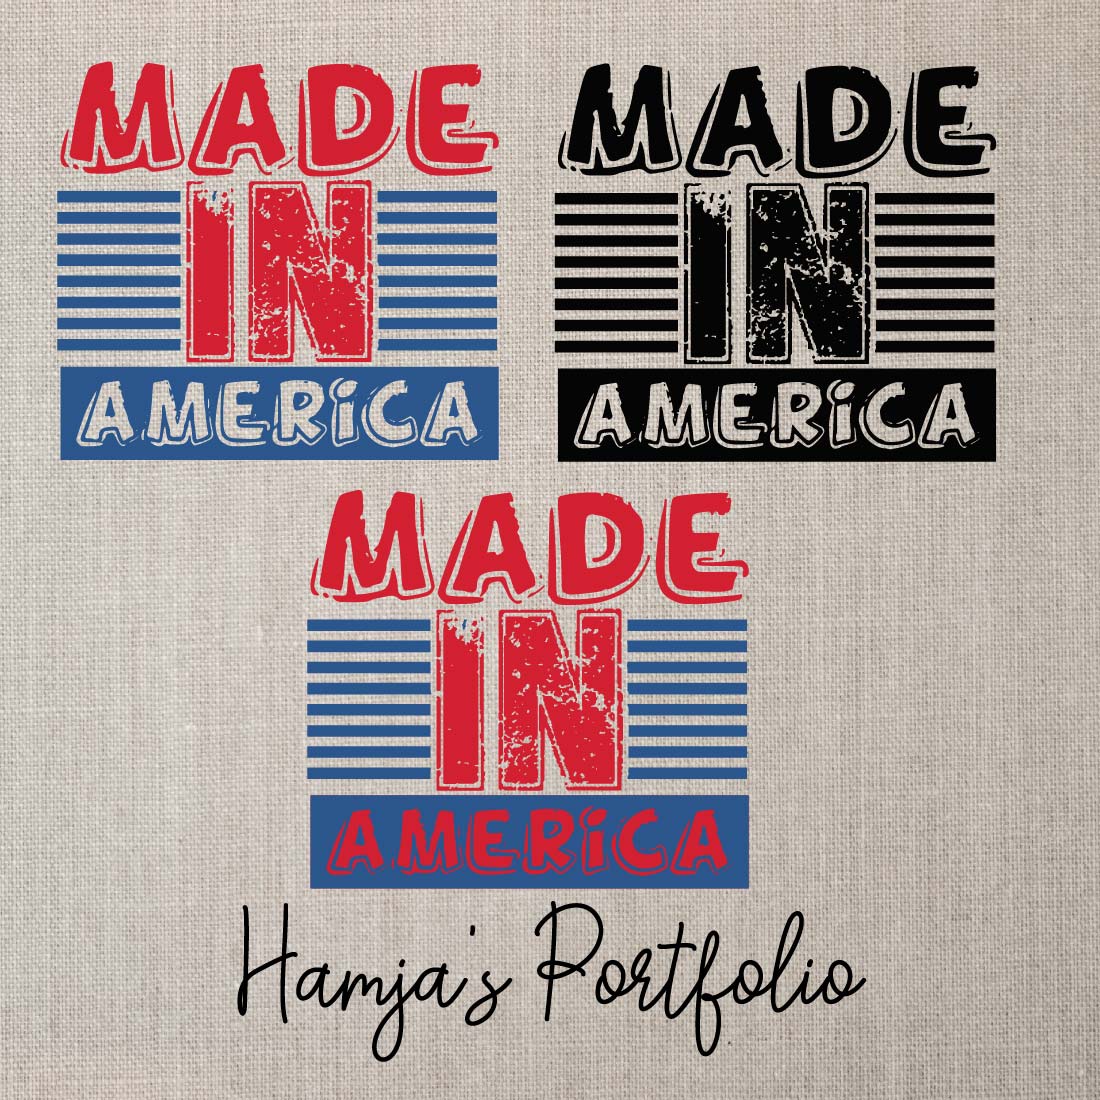 Made in America preview image.